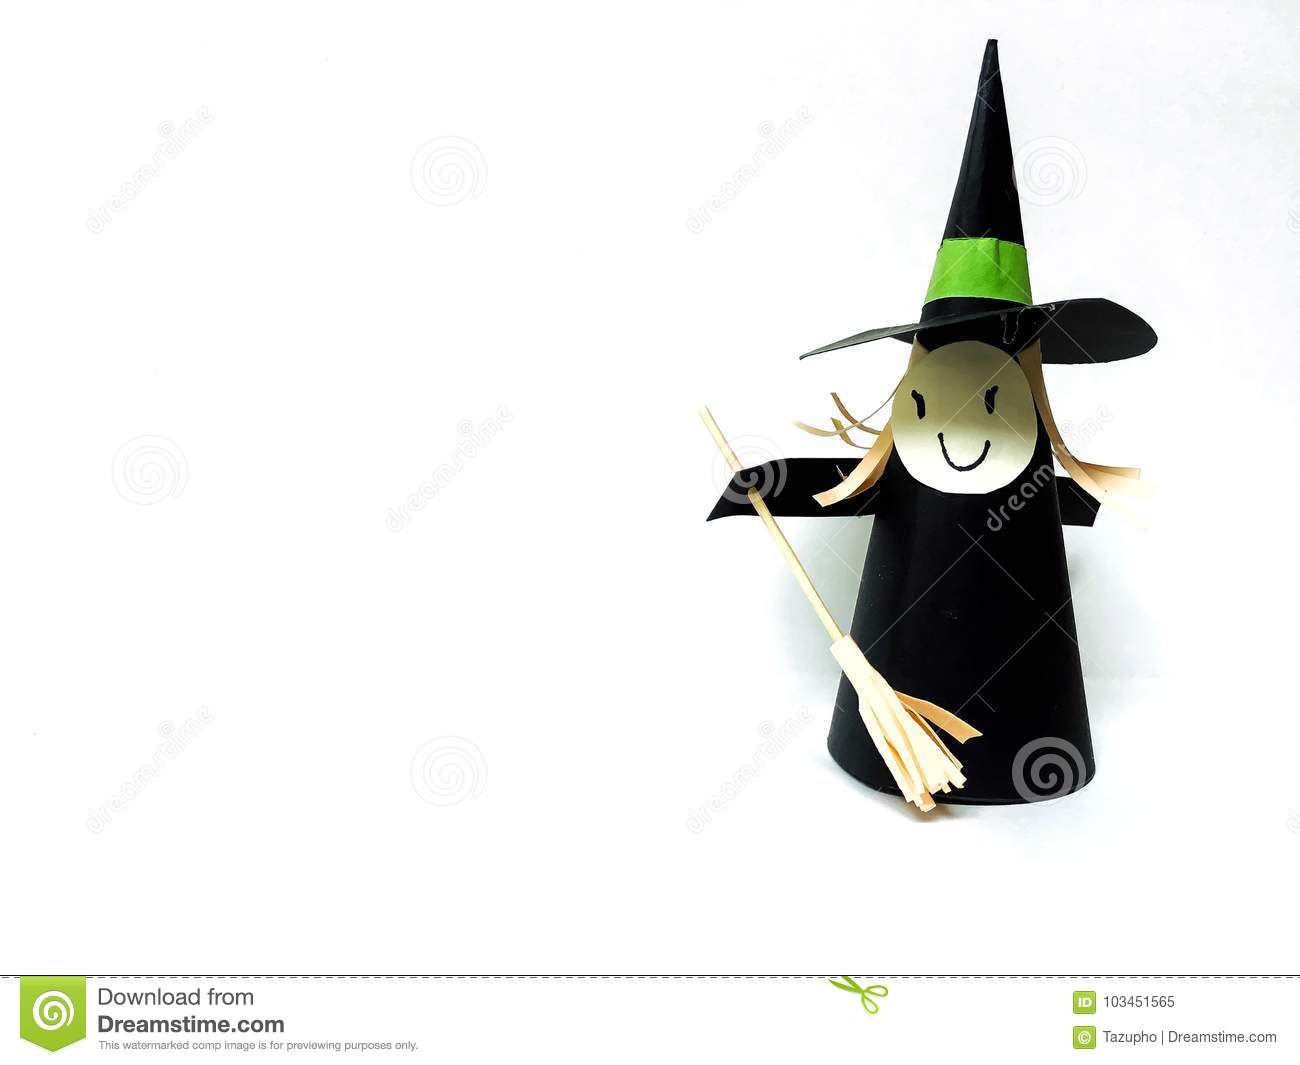 witch paper craft white background halloween diy halloween paper craft party ornament favor ideas witch paper craft